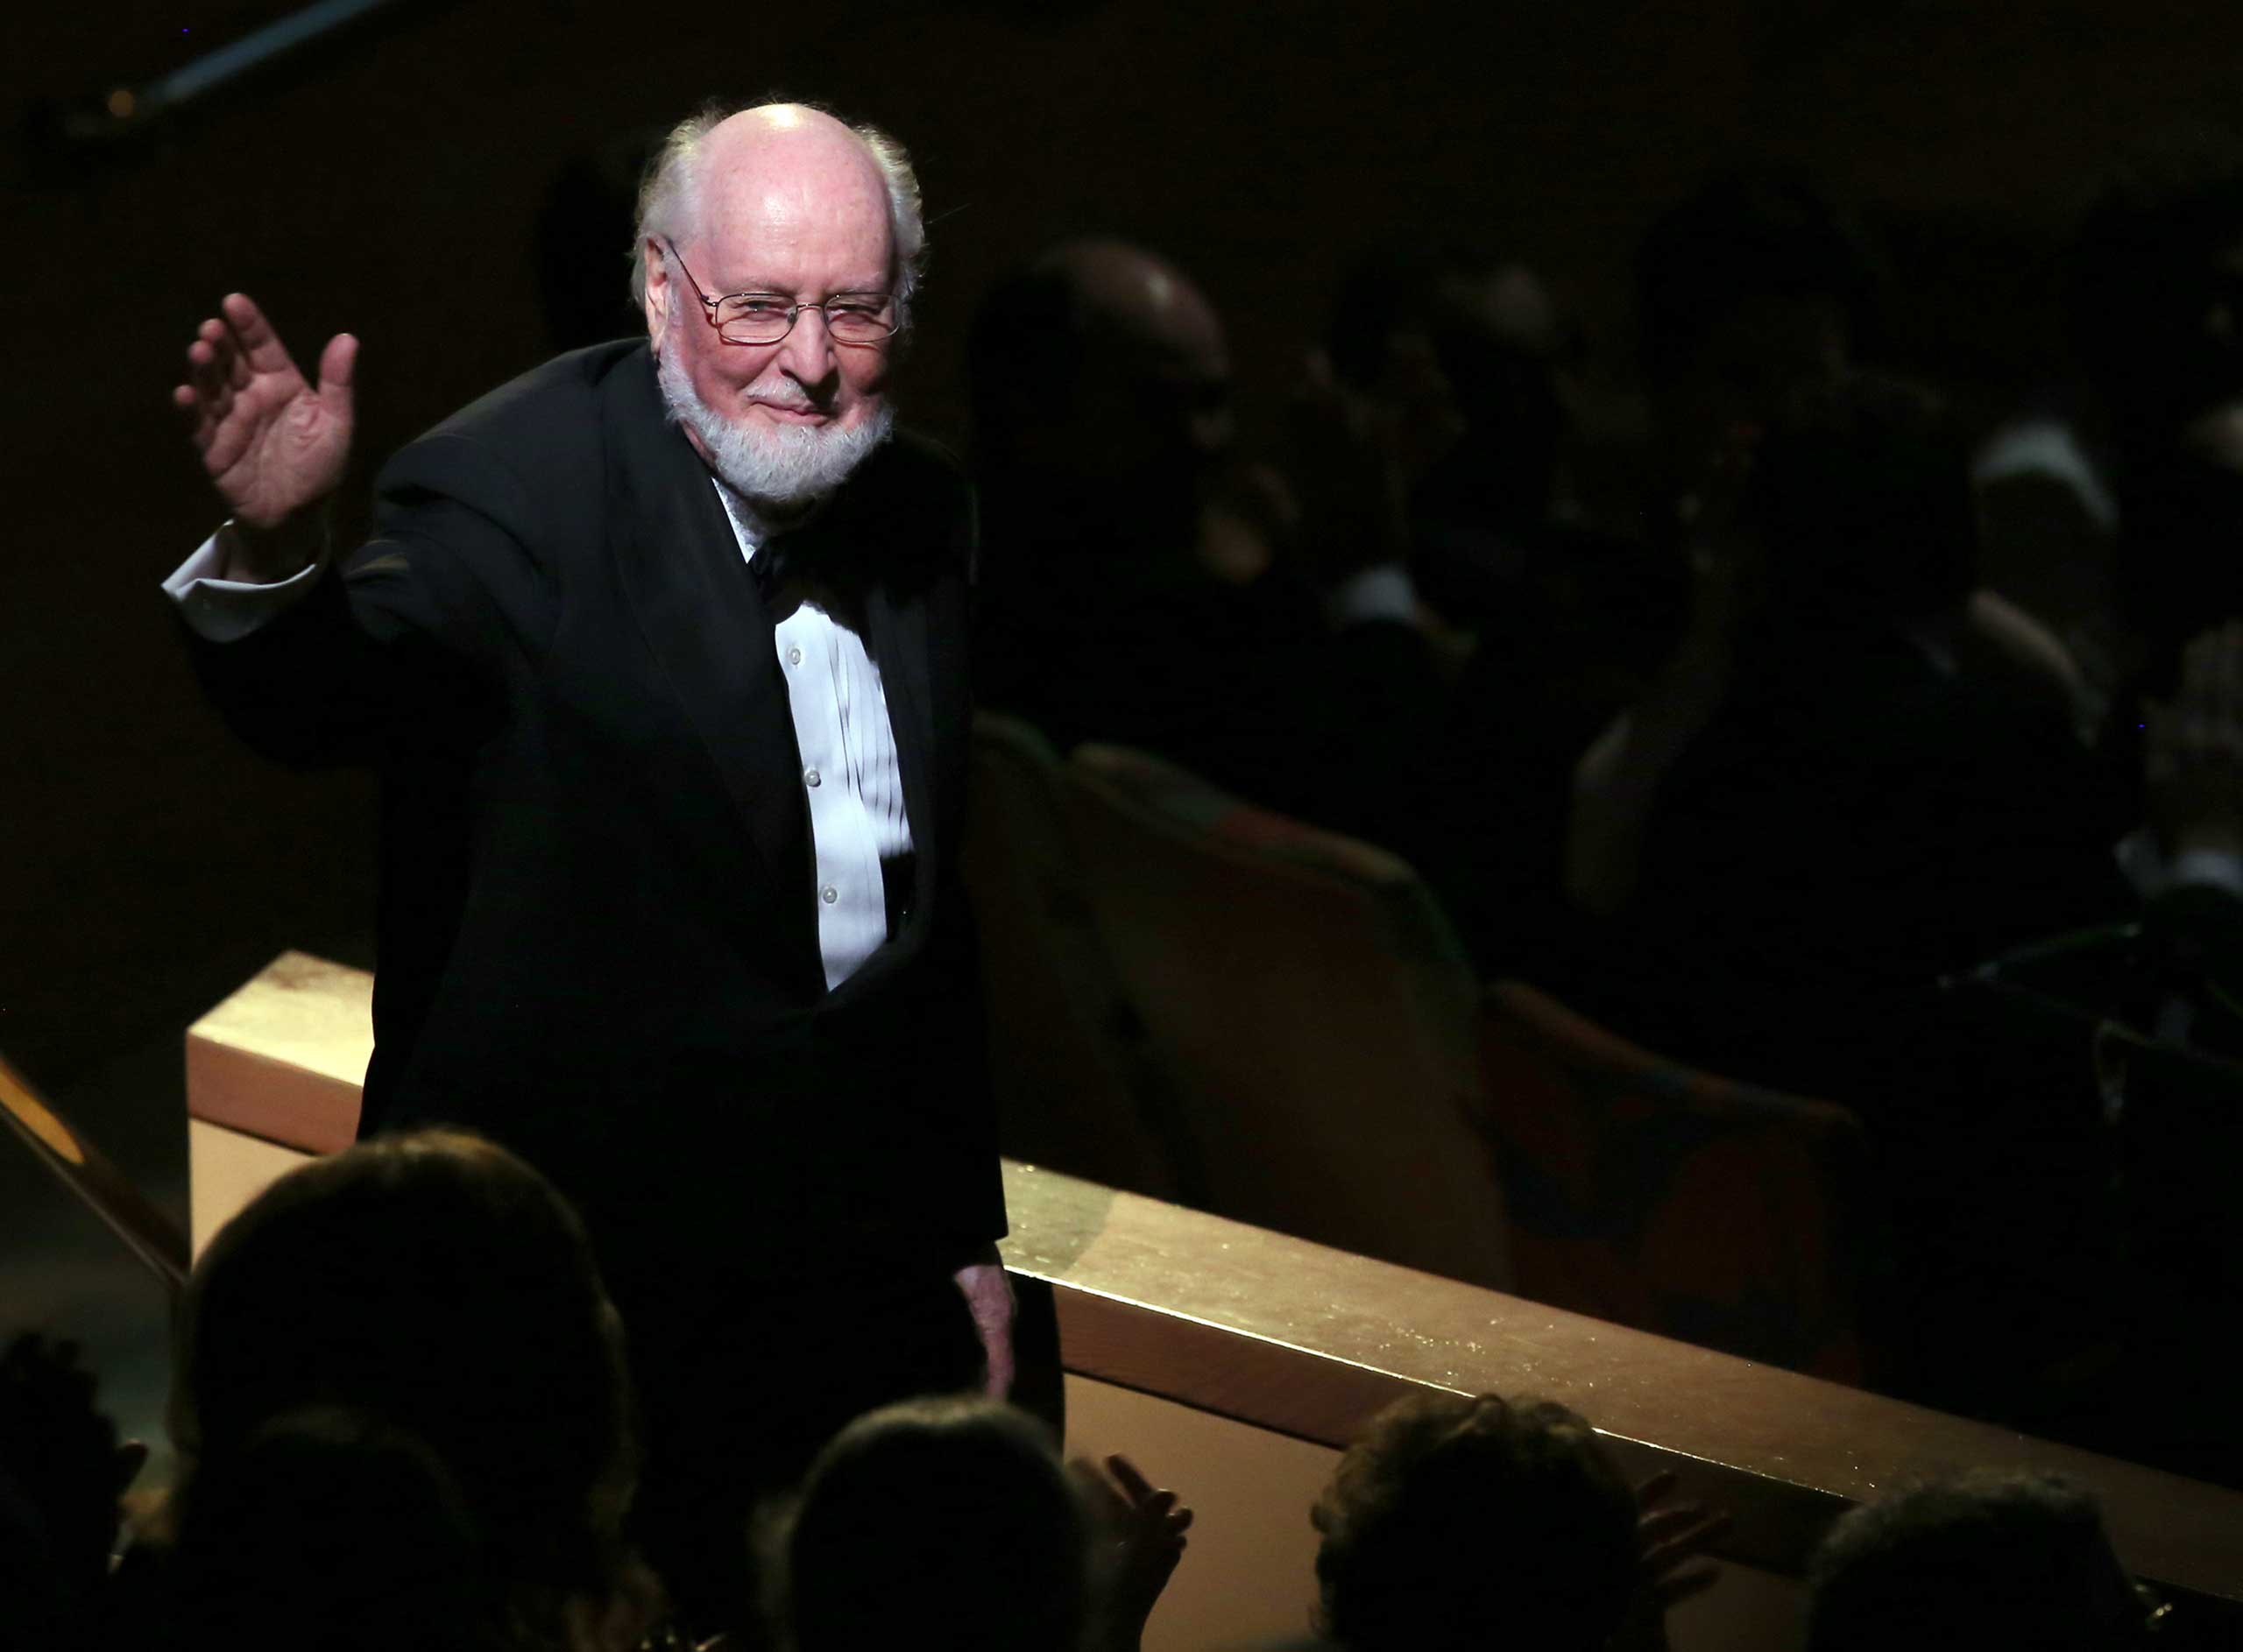 Composer John Williams waves to the audience at Los Angeles Philharmonic's Walt Disney Concert Hall Opening Night Gala  in Los Angeles, on Sept. 30, 2014. (Mathew Imaging—Getty Images)